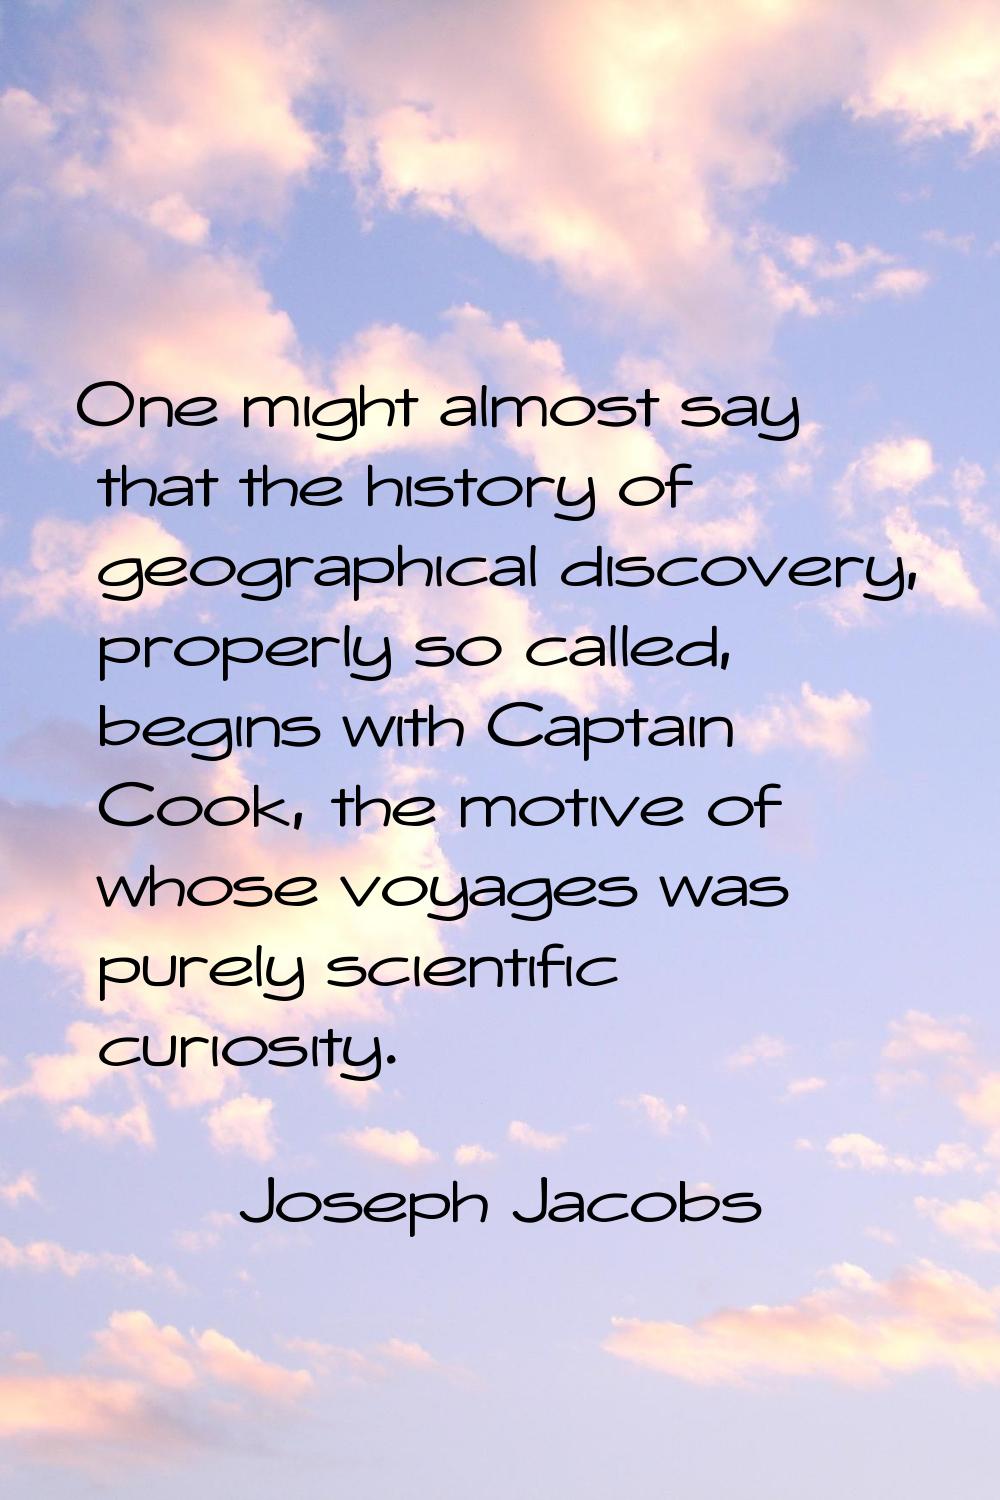 One might almost say that the history of geographical discovery, properly so called, begins with Ca